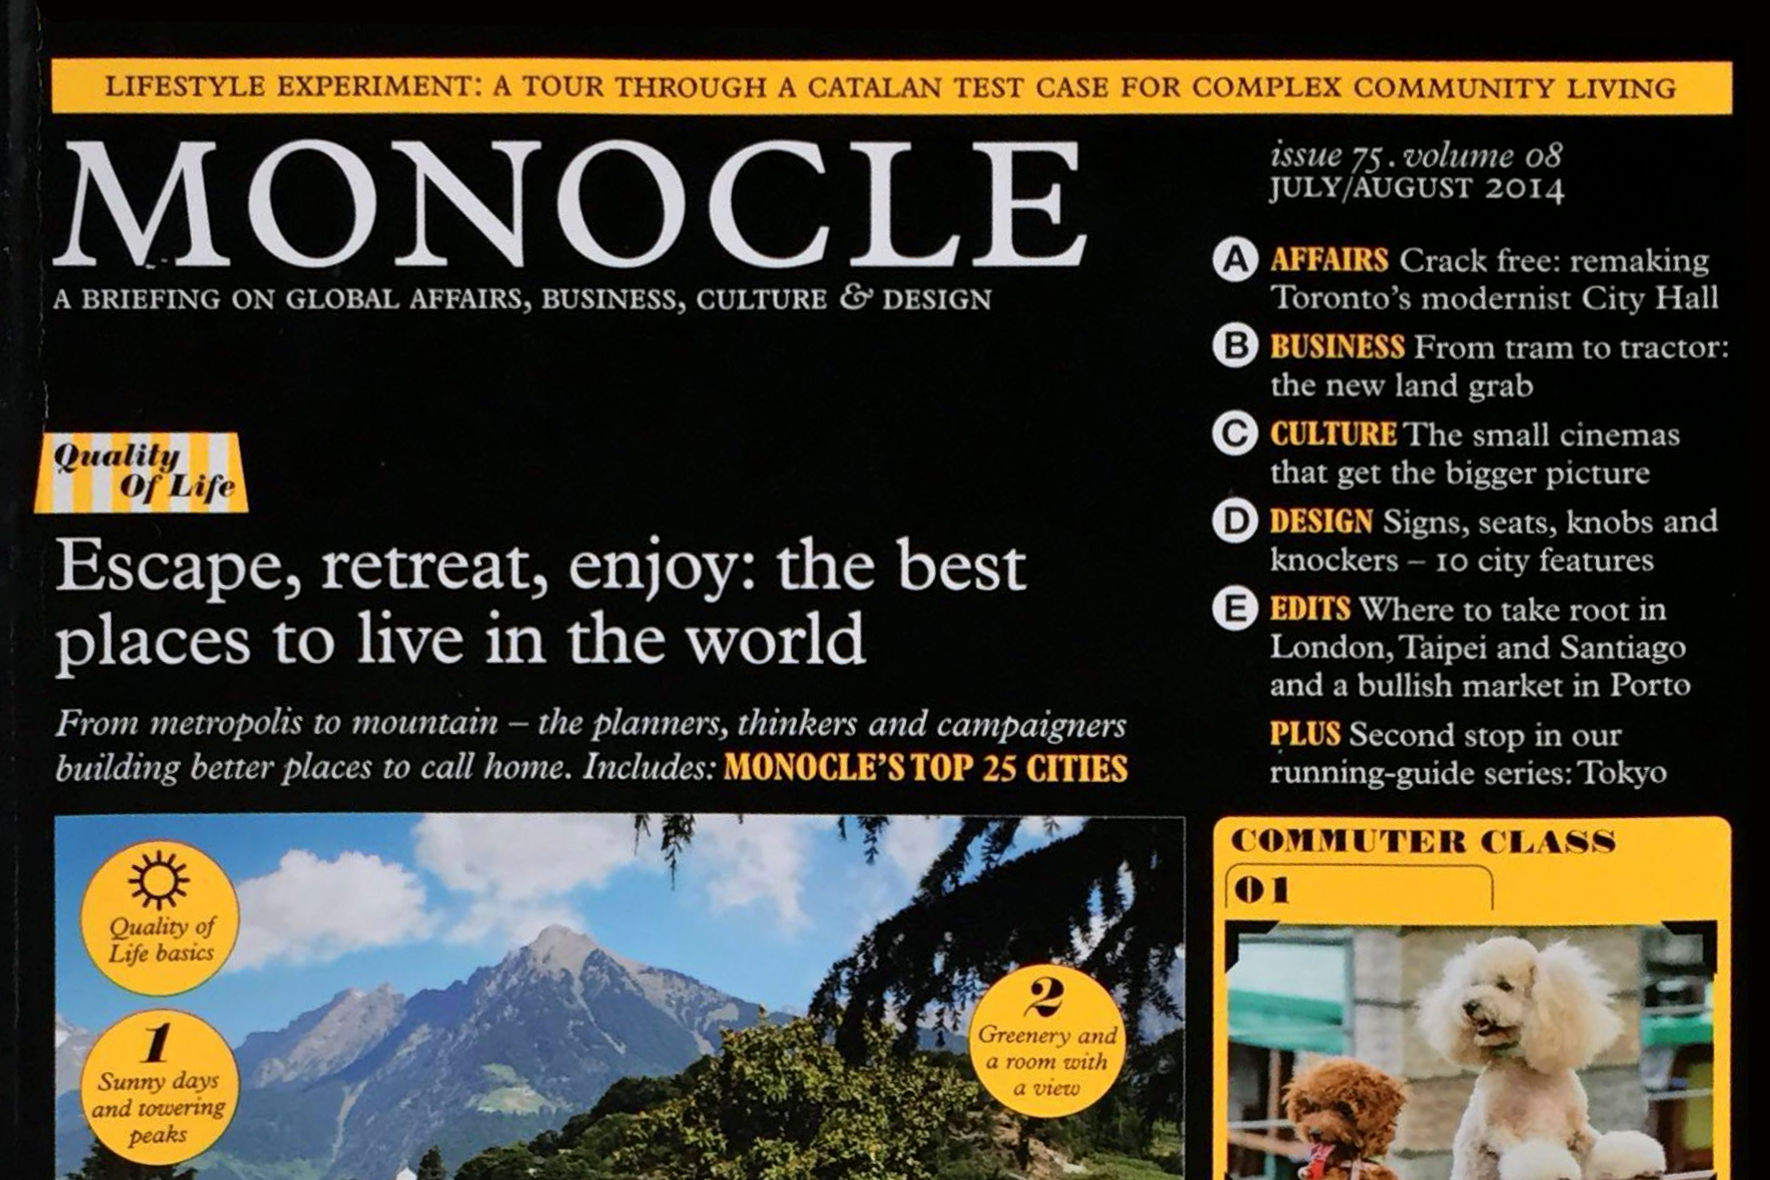 Cover of Monocle magazine, Issue 75, Voume 08, July/August 2014.